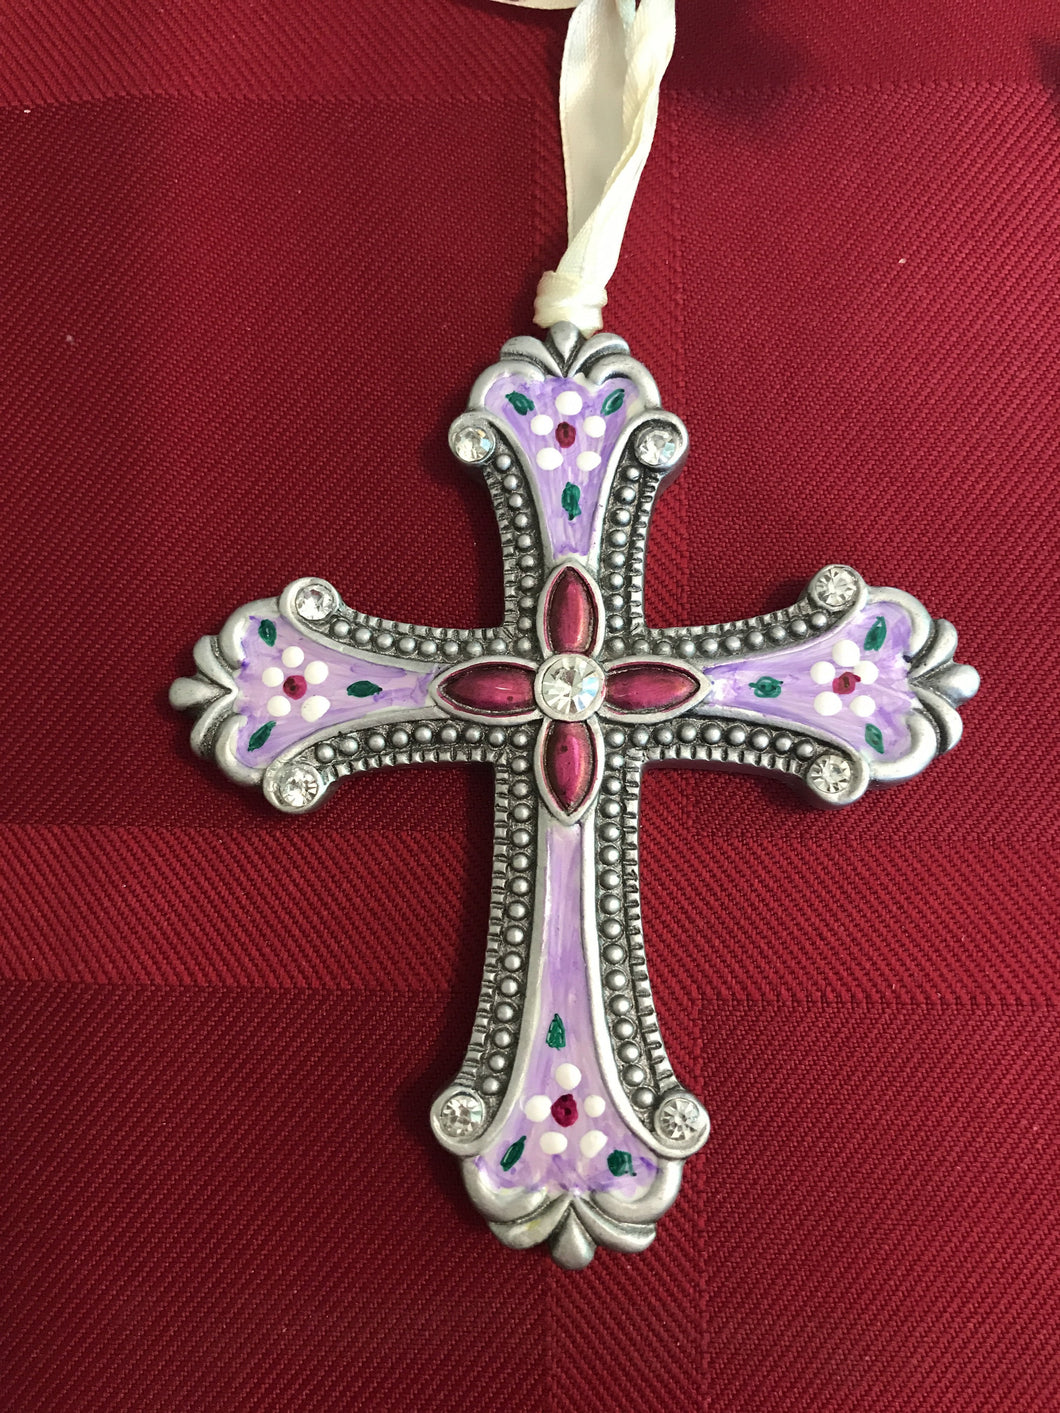 Hand painted cross in lavender